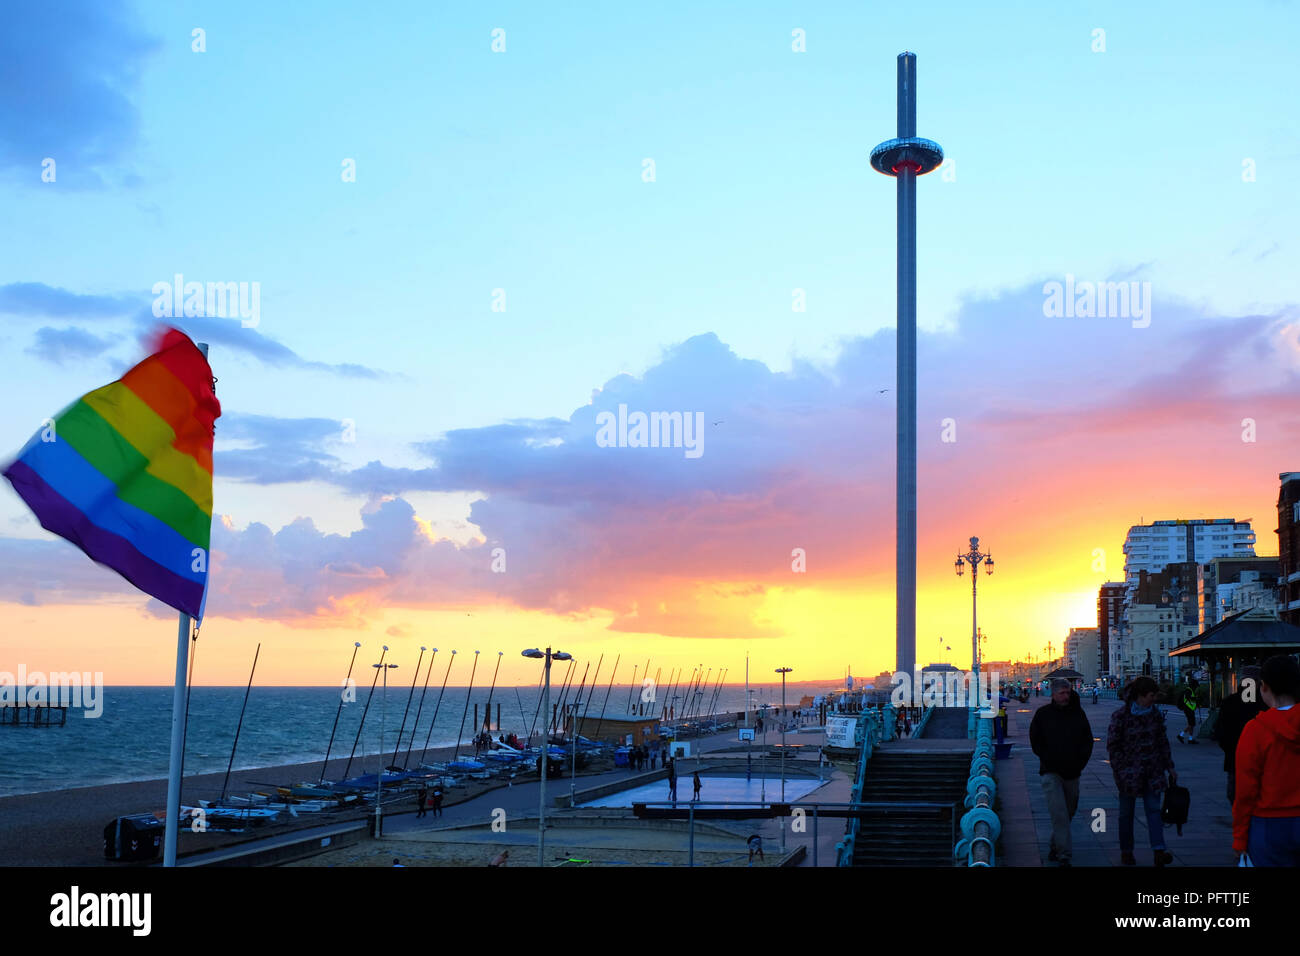 Brighton promenade at sunset with the moving viewing tower in the centre the promenade is very busy a pride flag is flying in the background the sky i Stock Photo